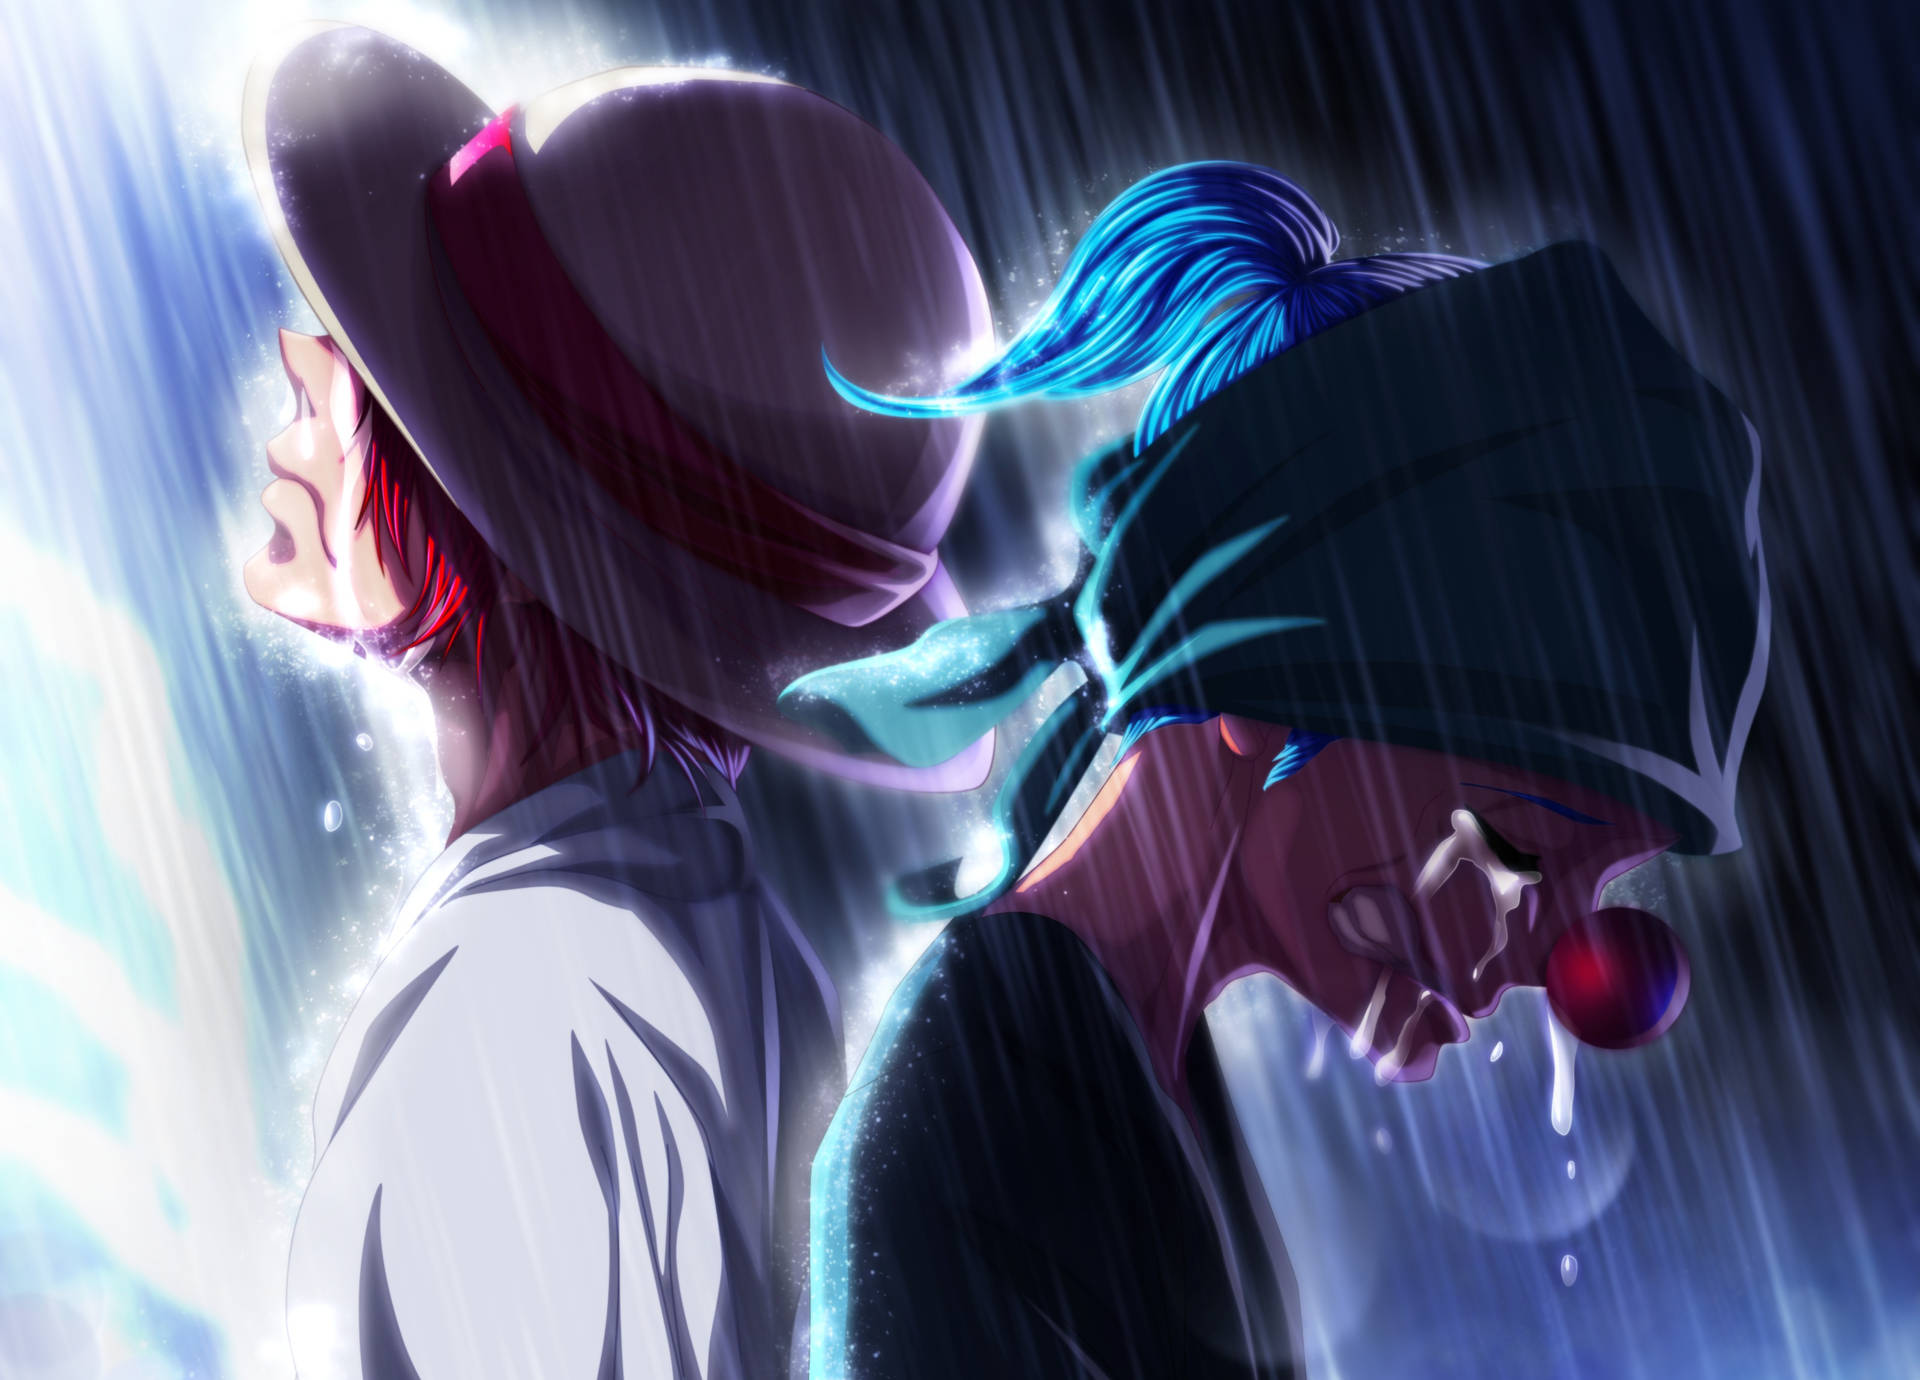 Wallpaper Anime One Piece Shanks Poster Kaido Background  Download  Free Image